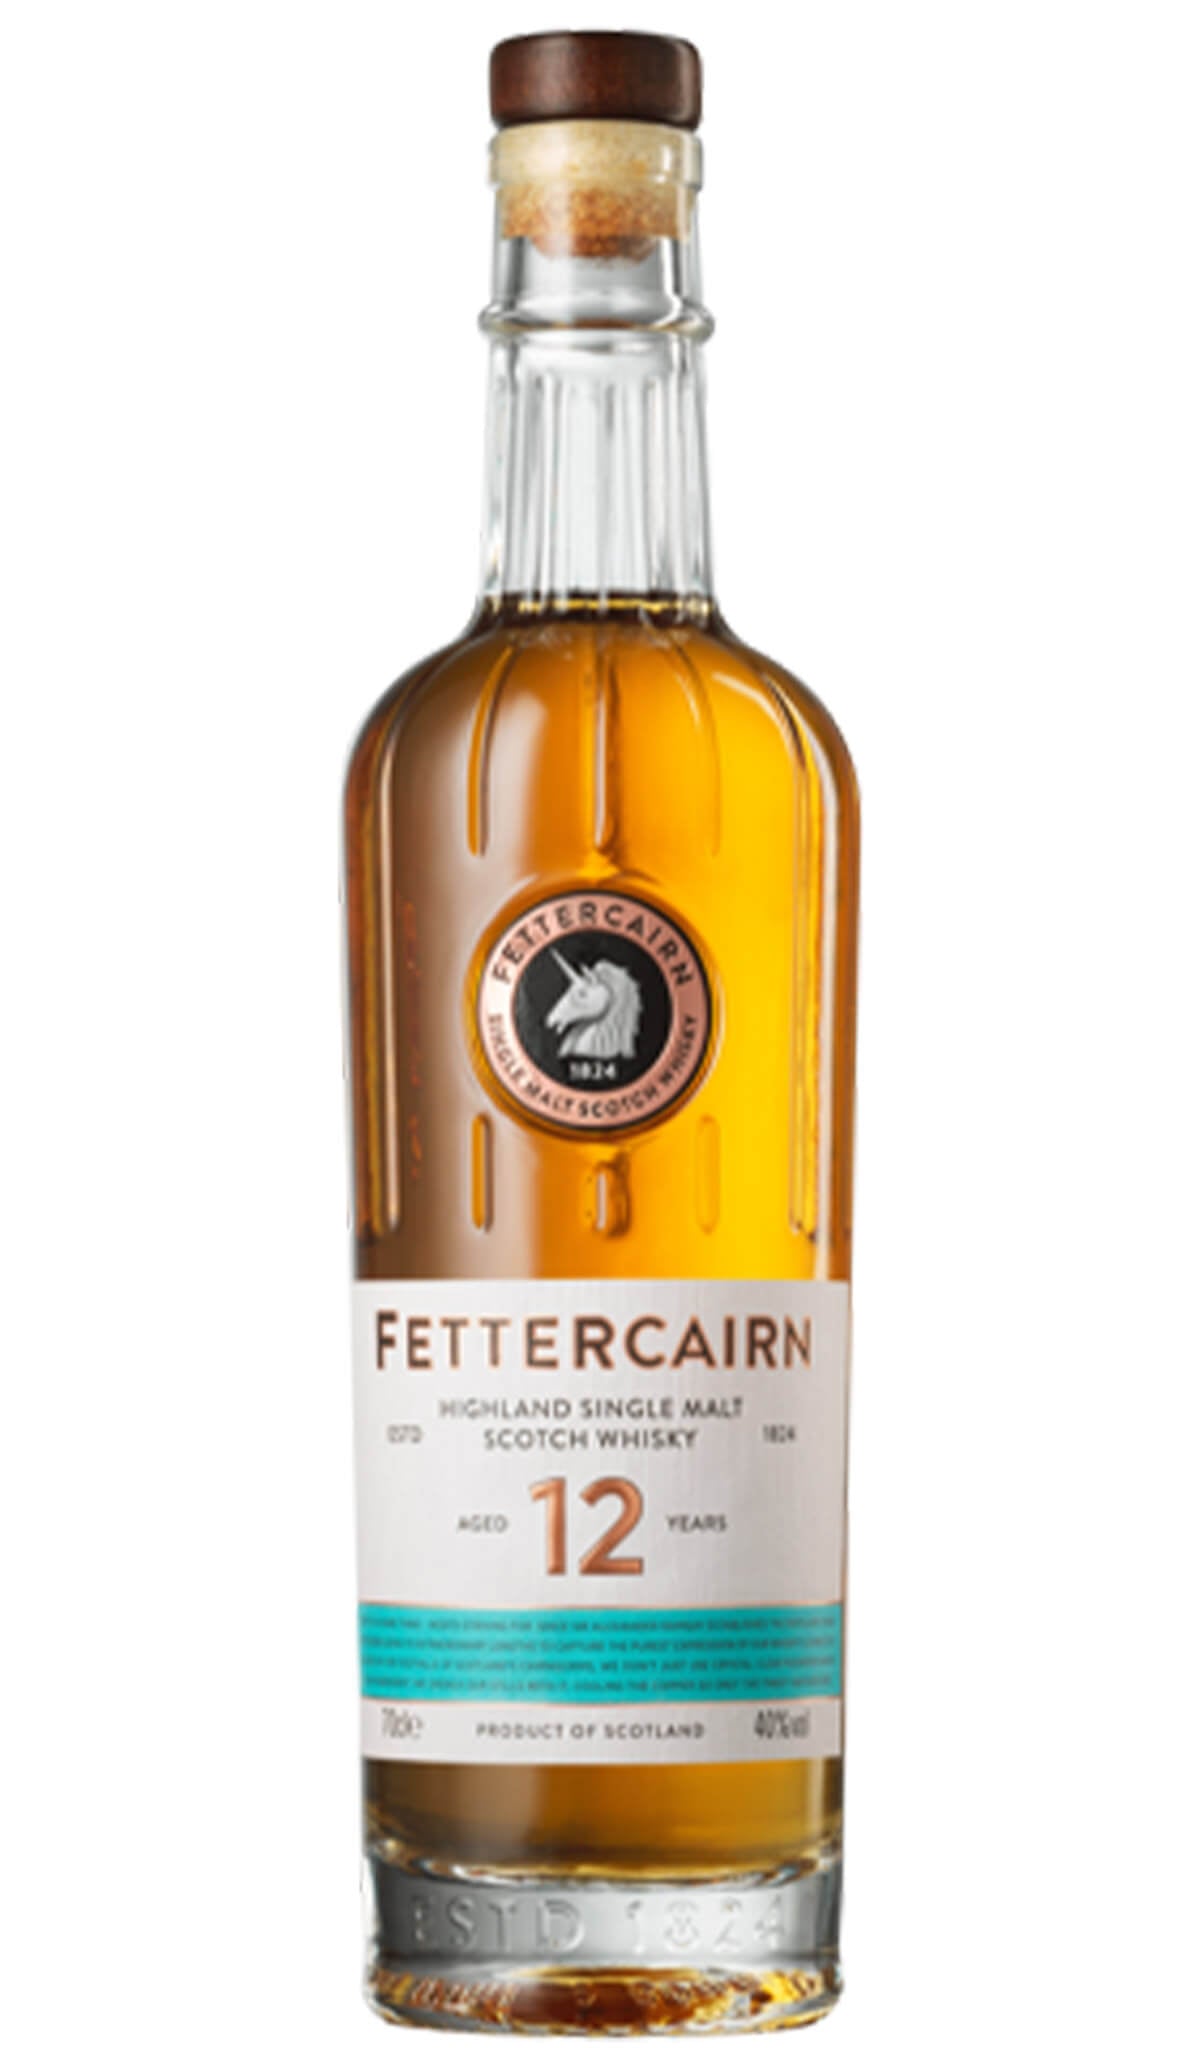 Find out more, explore the range and purchase Fettercairn Highland Single Malt 12 YO Whisky 700ml available online at Wine Sellers Direct - Australia's independent liquor specialists.